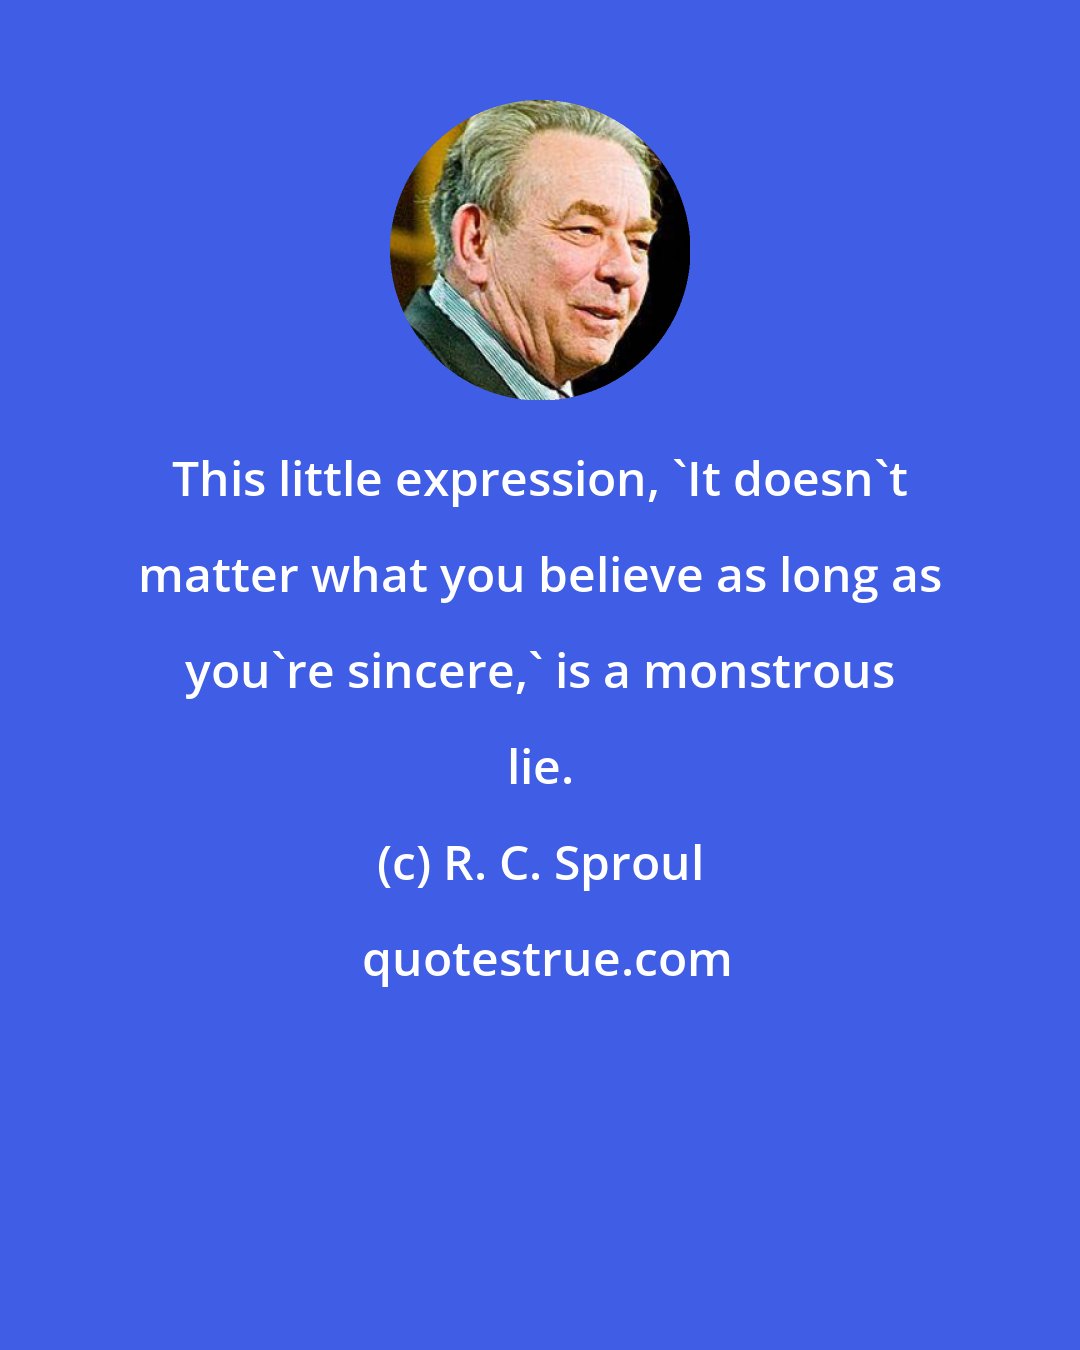 R. C. Sproul: This little expression, 'It doesn't matter what you believe as long as you're sincere,' is a monstrous lie.